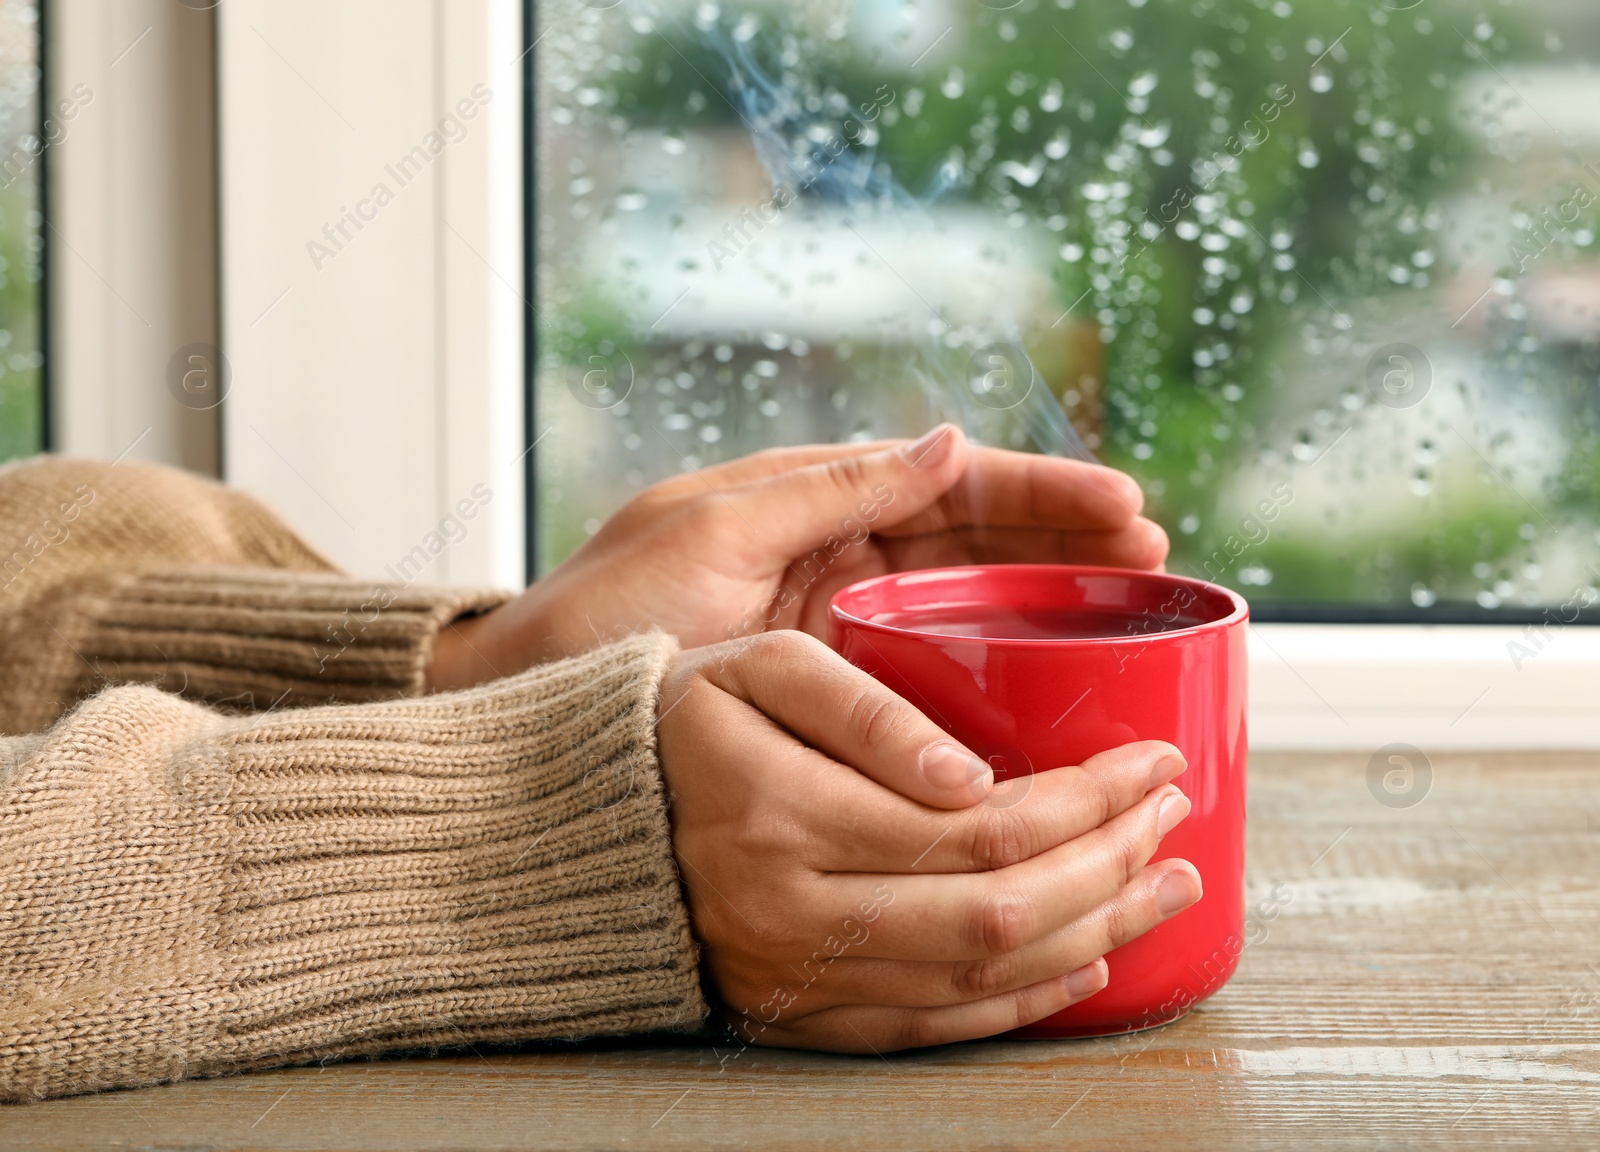 Photo of Woman with cup of hot drink at wooden table near window on rainy day, closeup